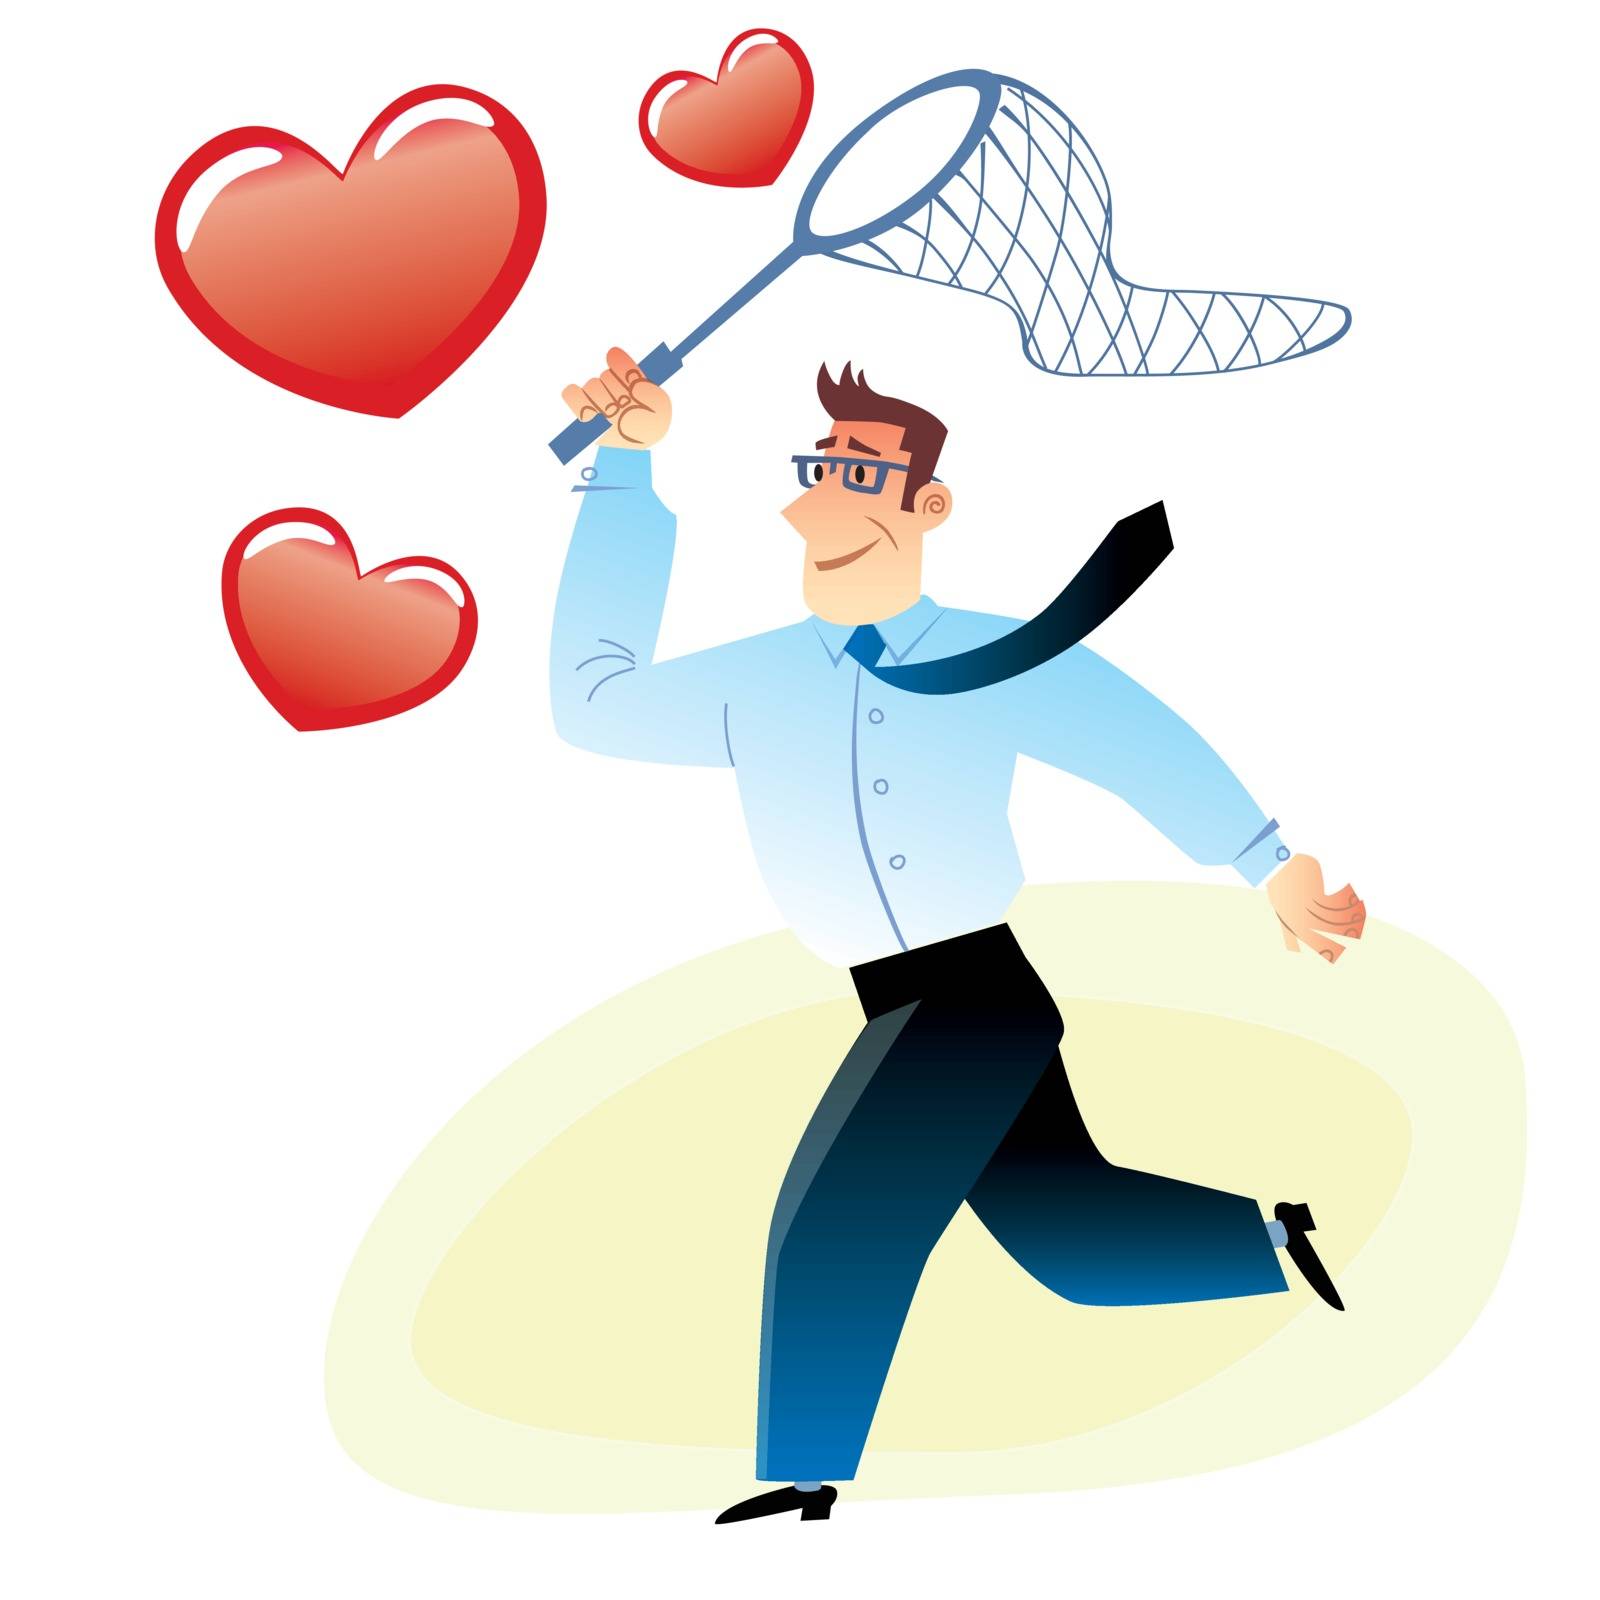 man with a net catches flying red heart image search love